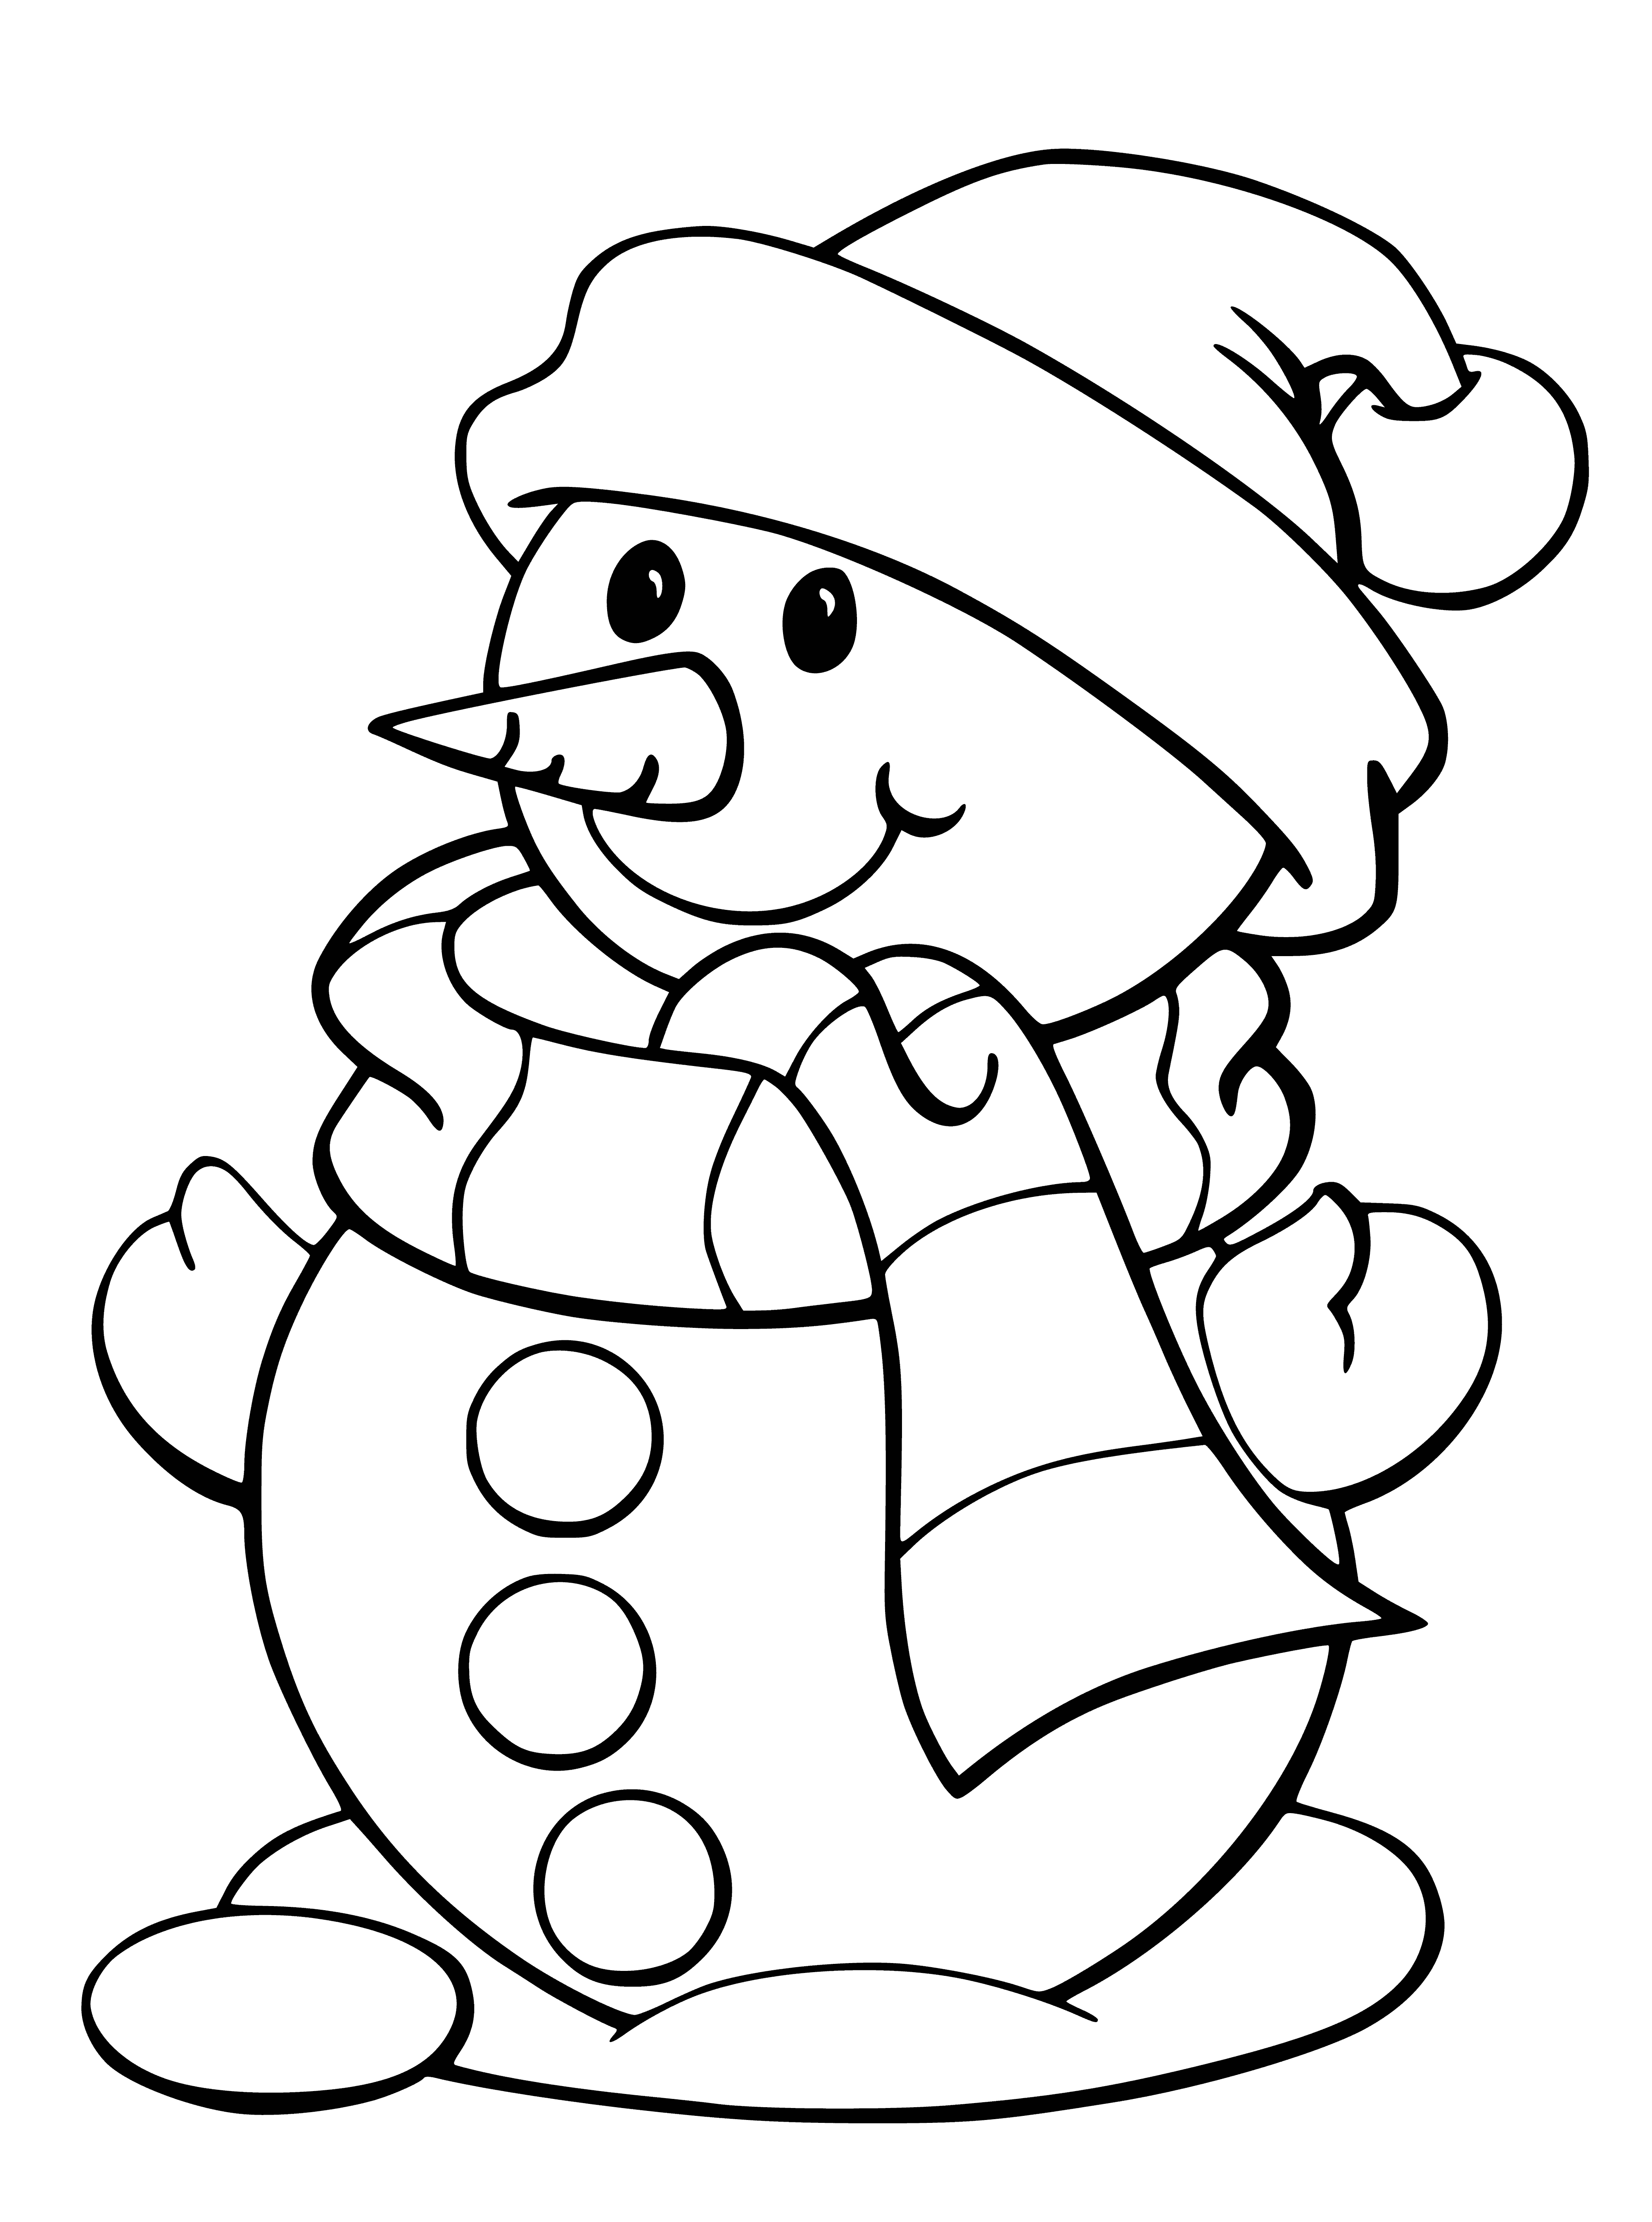 He also has two coal eyes, a carrot nose, and a coal mouth.

A snowman with a scarf and hat, two coal eyes, carrot nose and coal mouth.